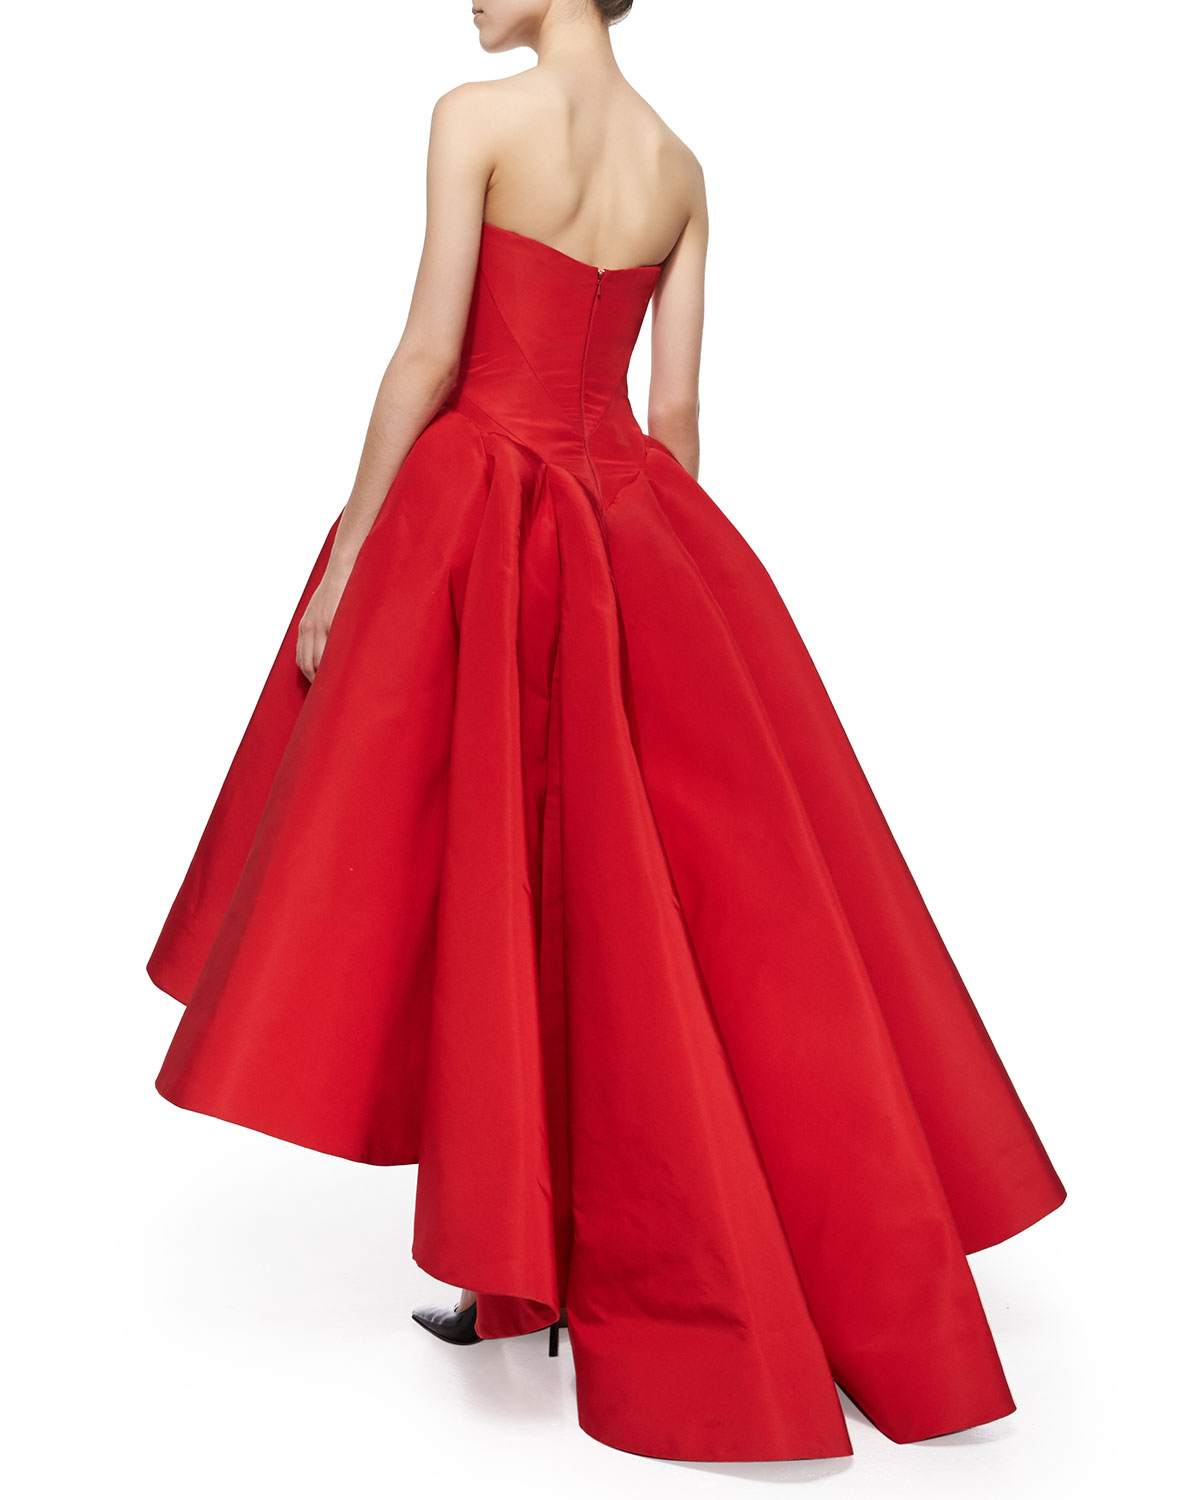 Lyst - Zac Posen Strapless Cat-ear-bodice High-low Gown in Red